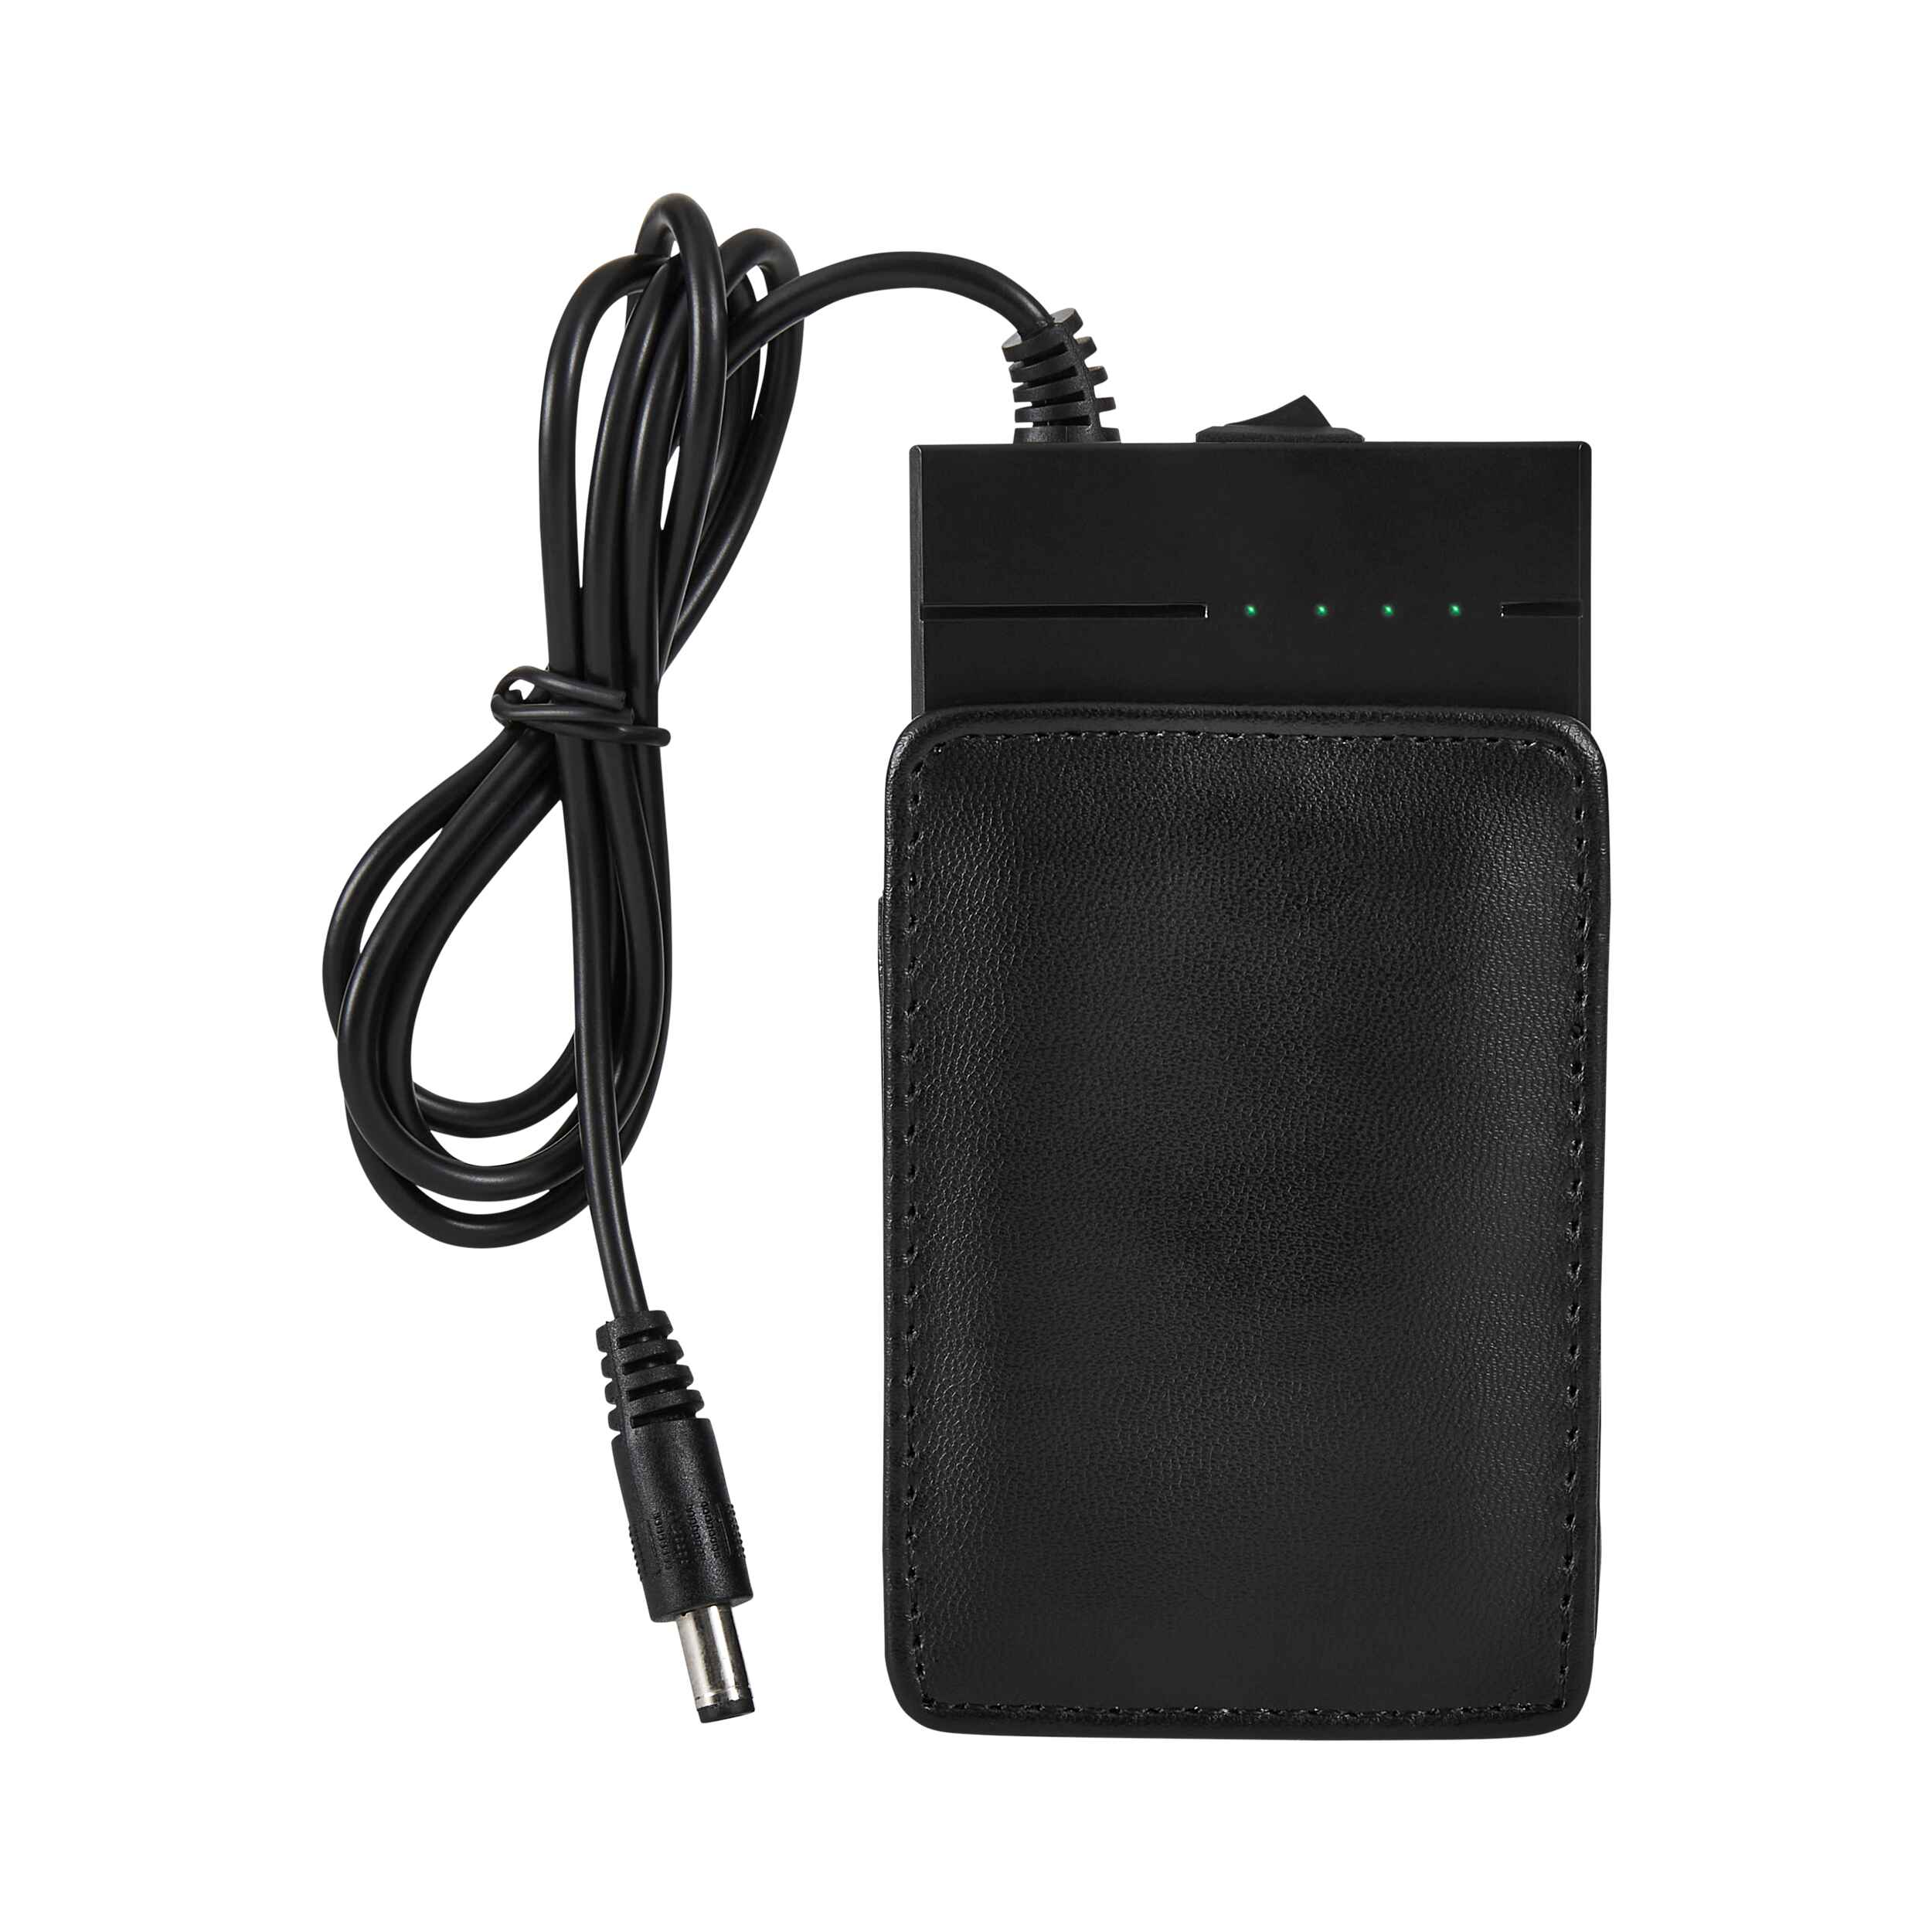 LaserCap power pack in belt clip leather pouch holder